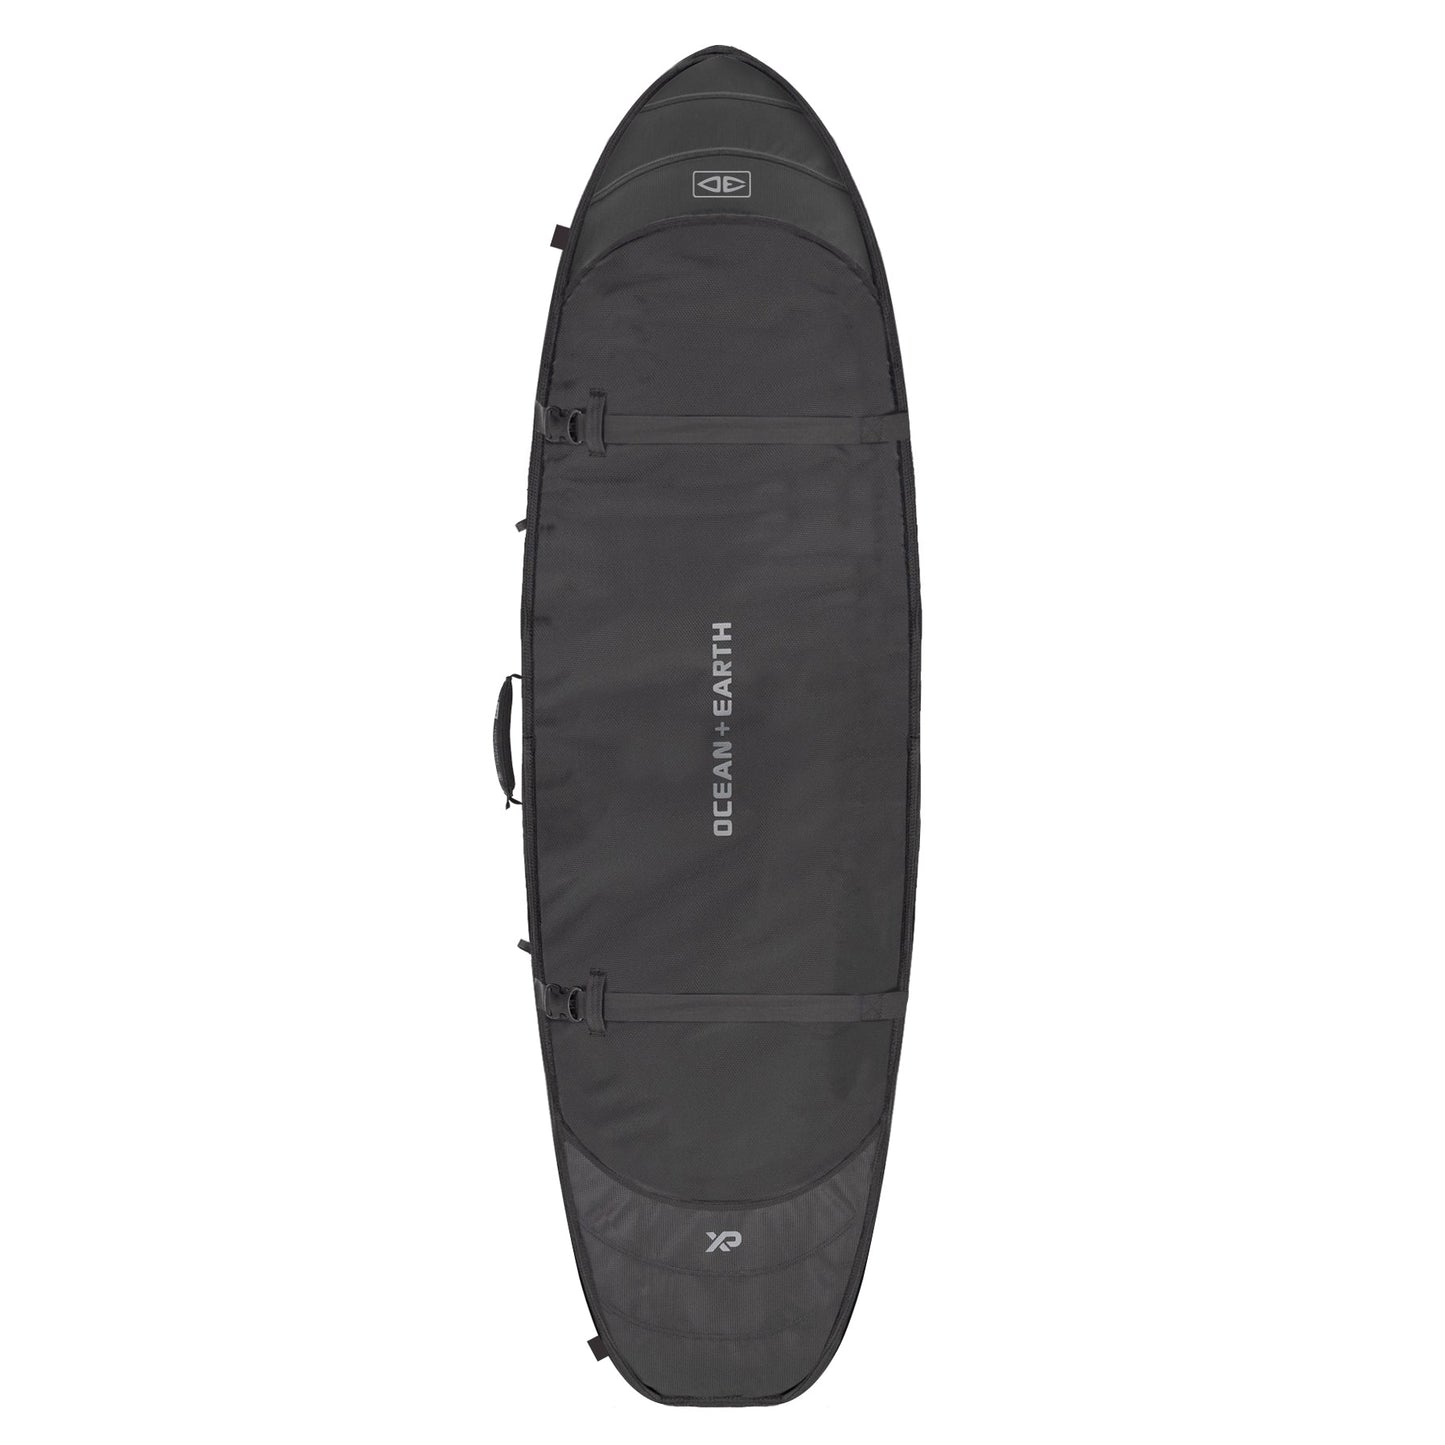 ocean-and-earth-hypa-travel-2-board-6-0-6-6-7-0-7-6-8-0-double-coffin-surfboard-bag-surfboard-protection-galway-ireland-blacksheepsurfco-side